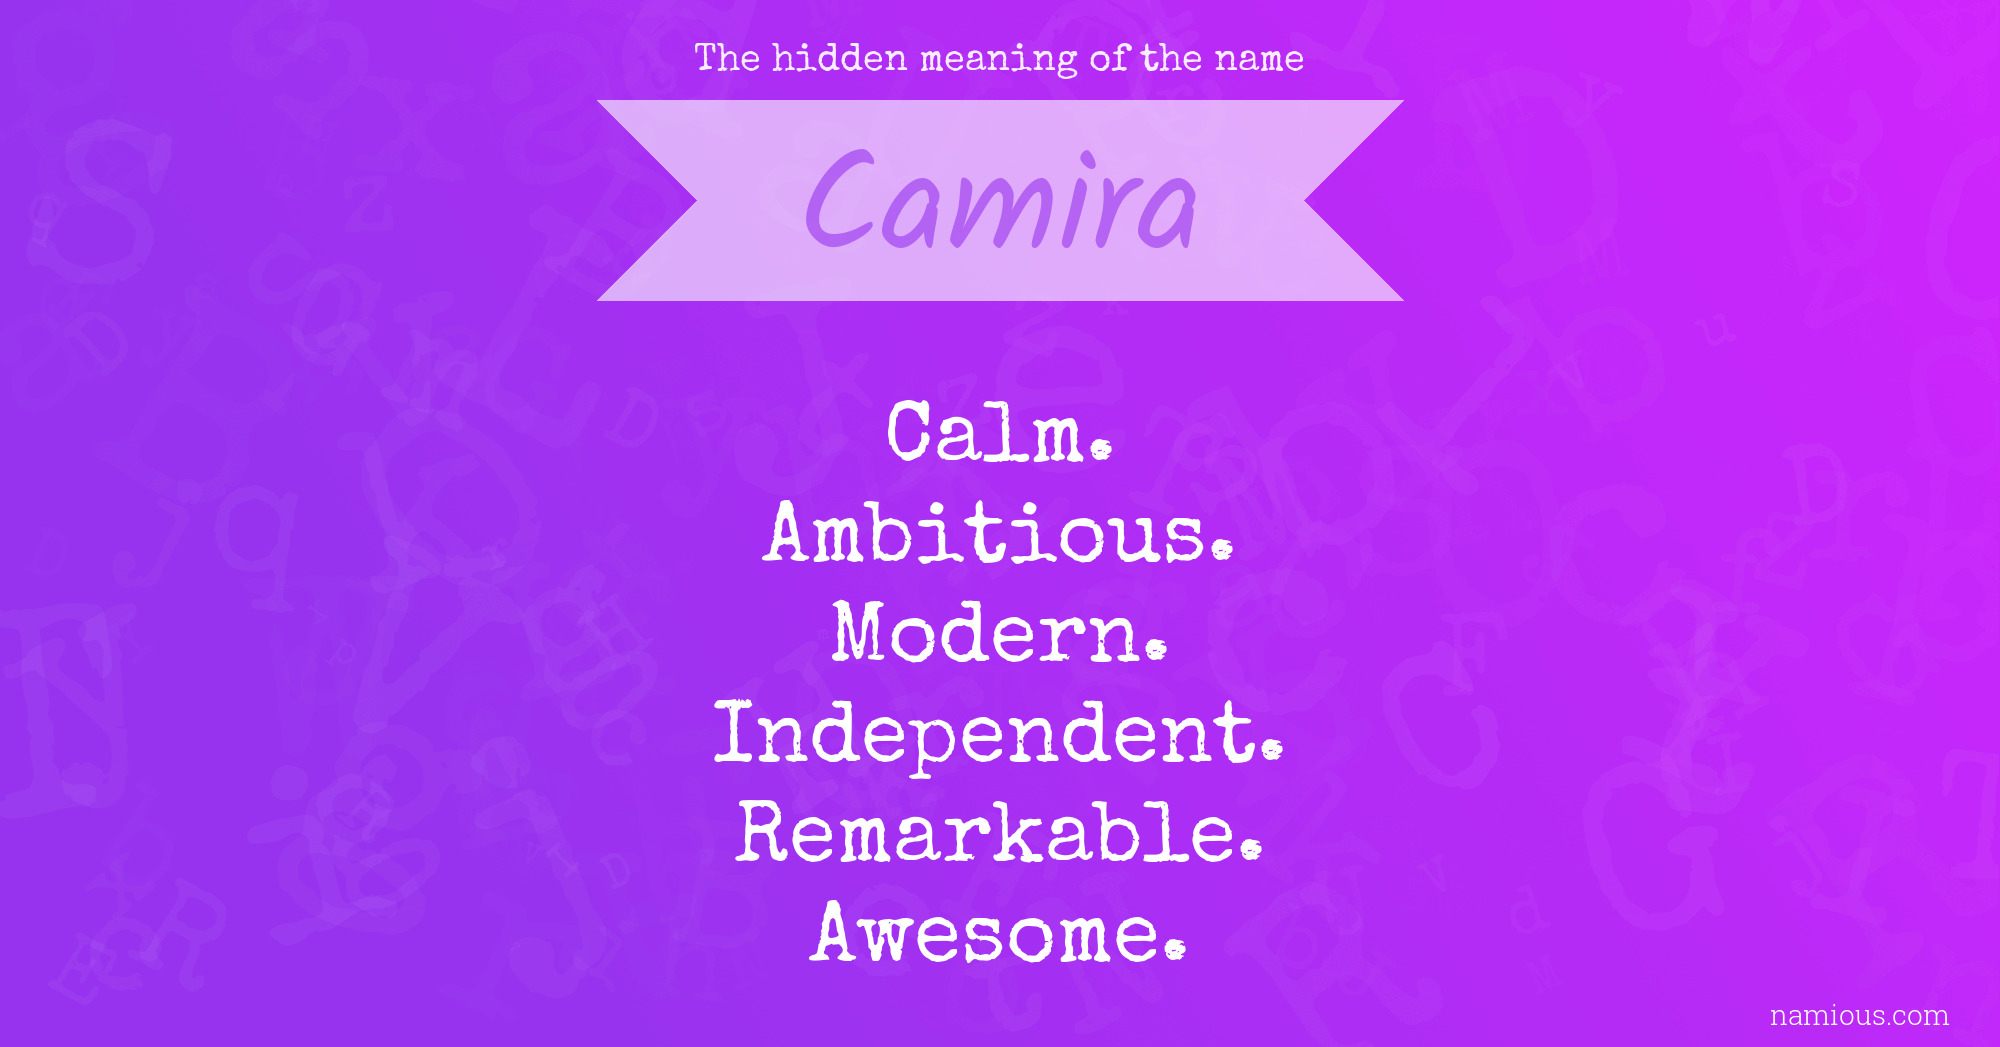 The hidden meaning of the name Camira